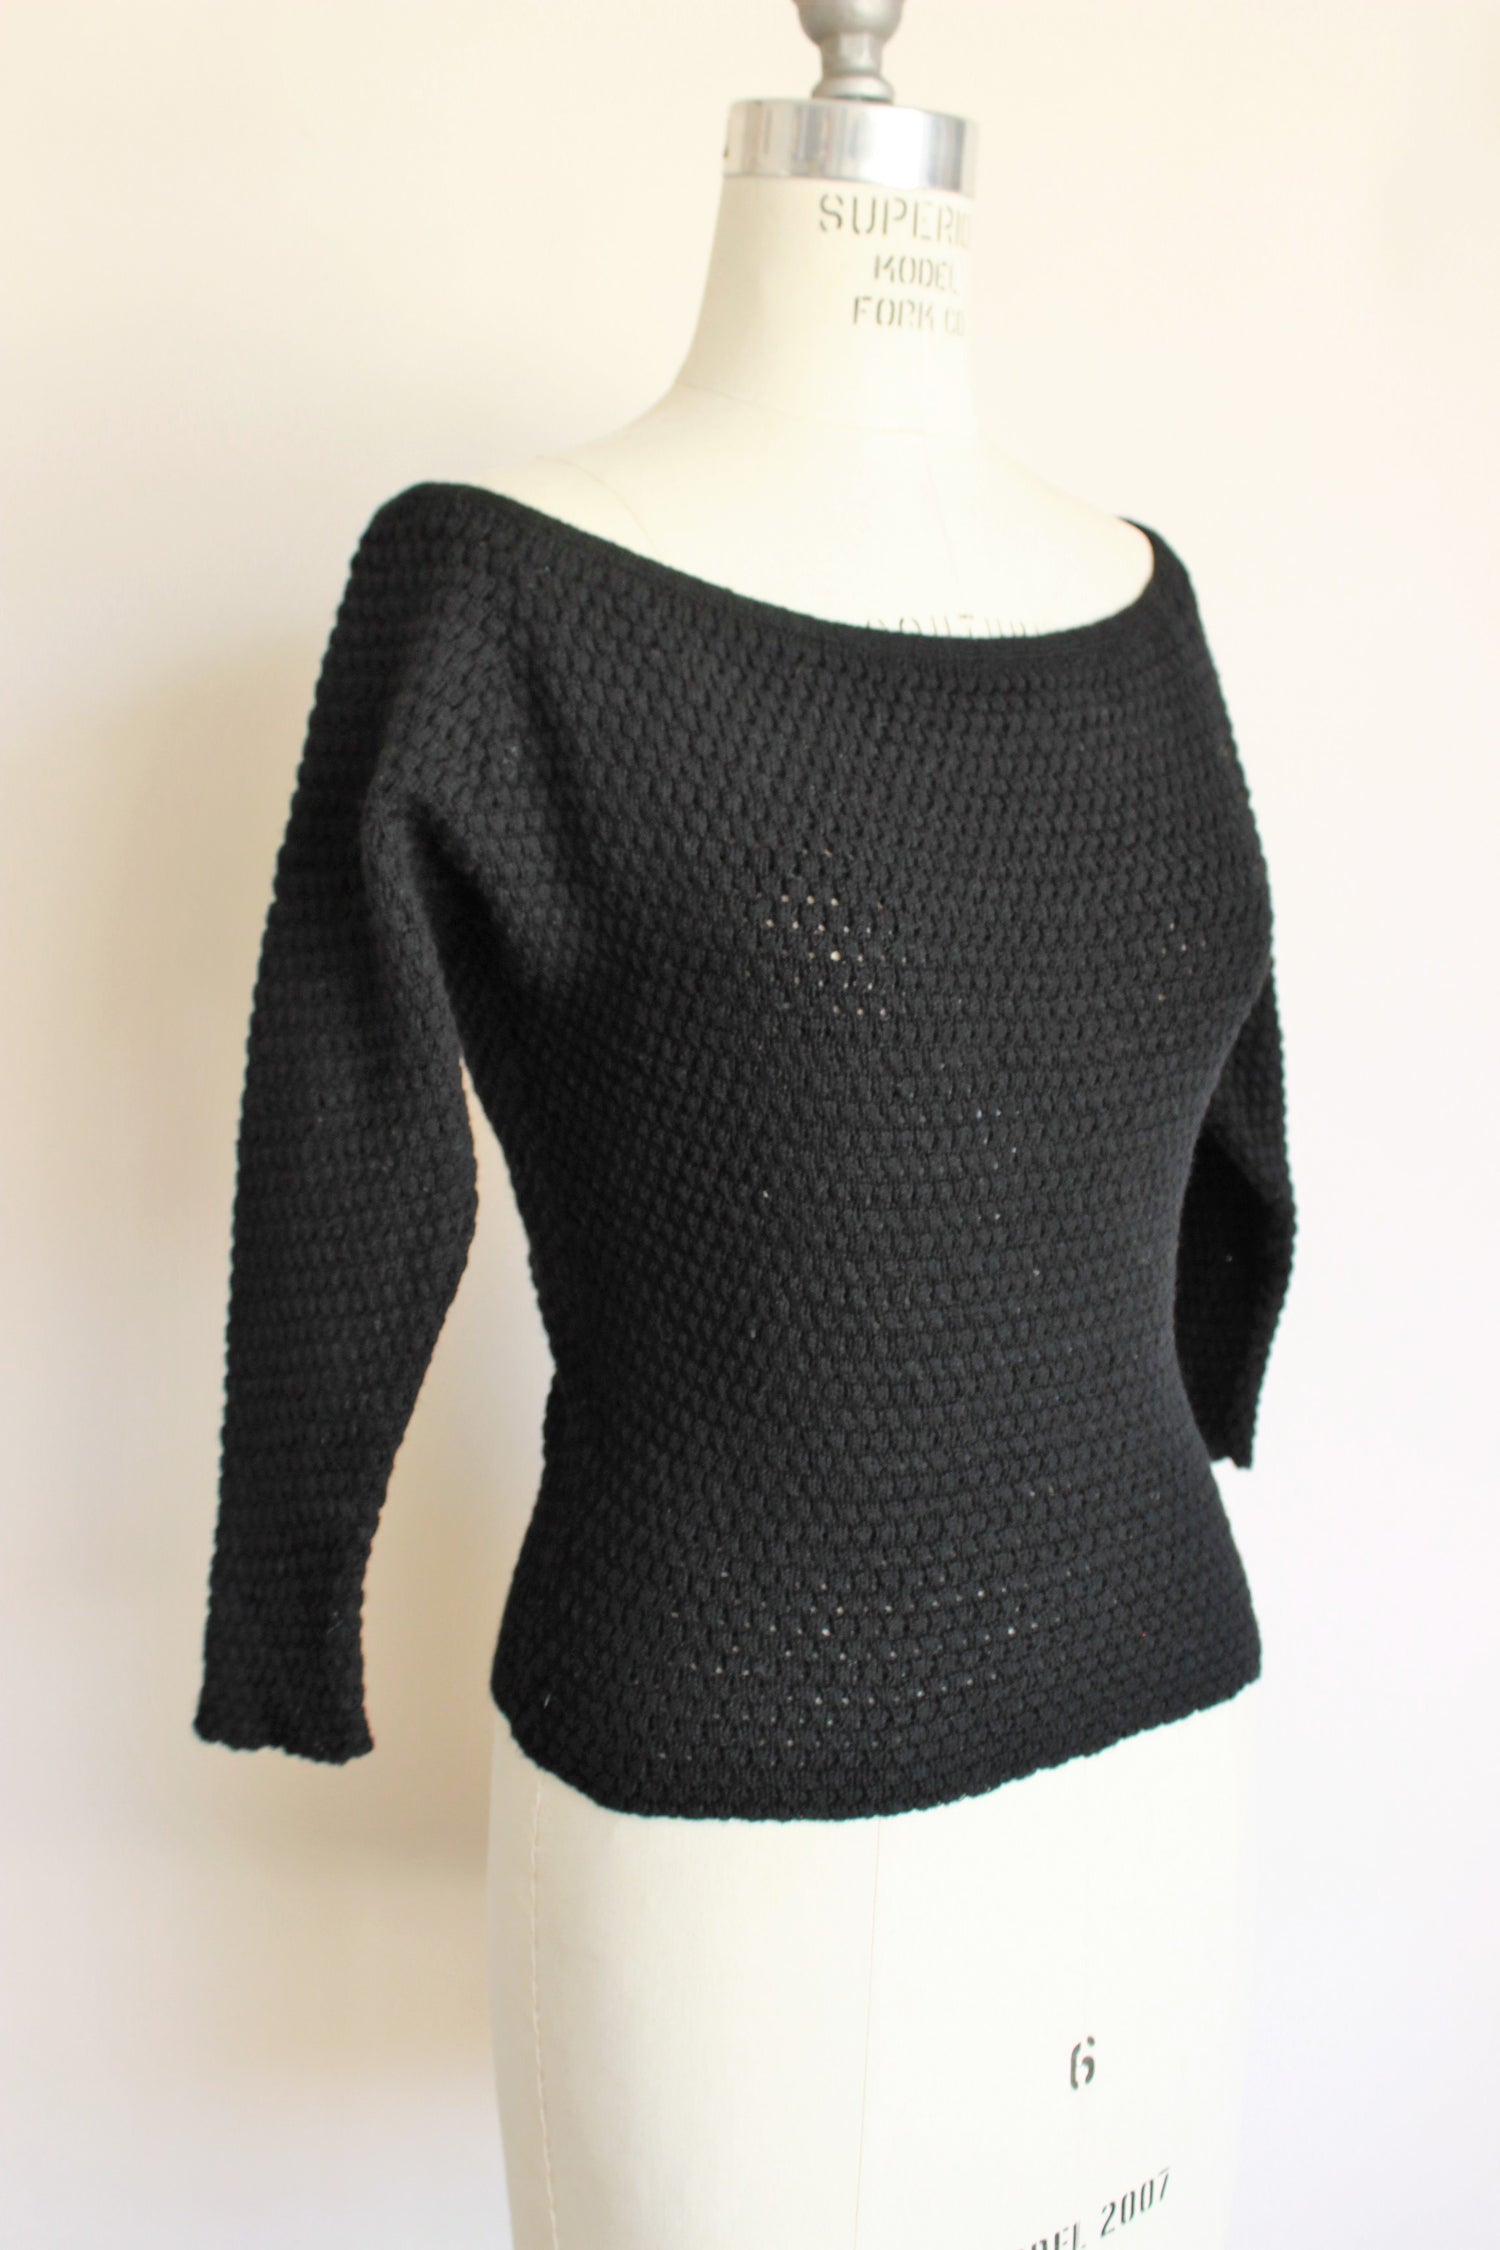 Vintage 1950s Black Wool Fitted Sweater, by Goldworm